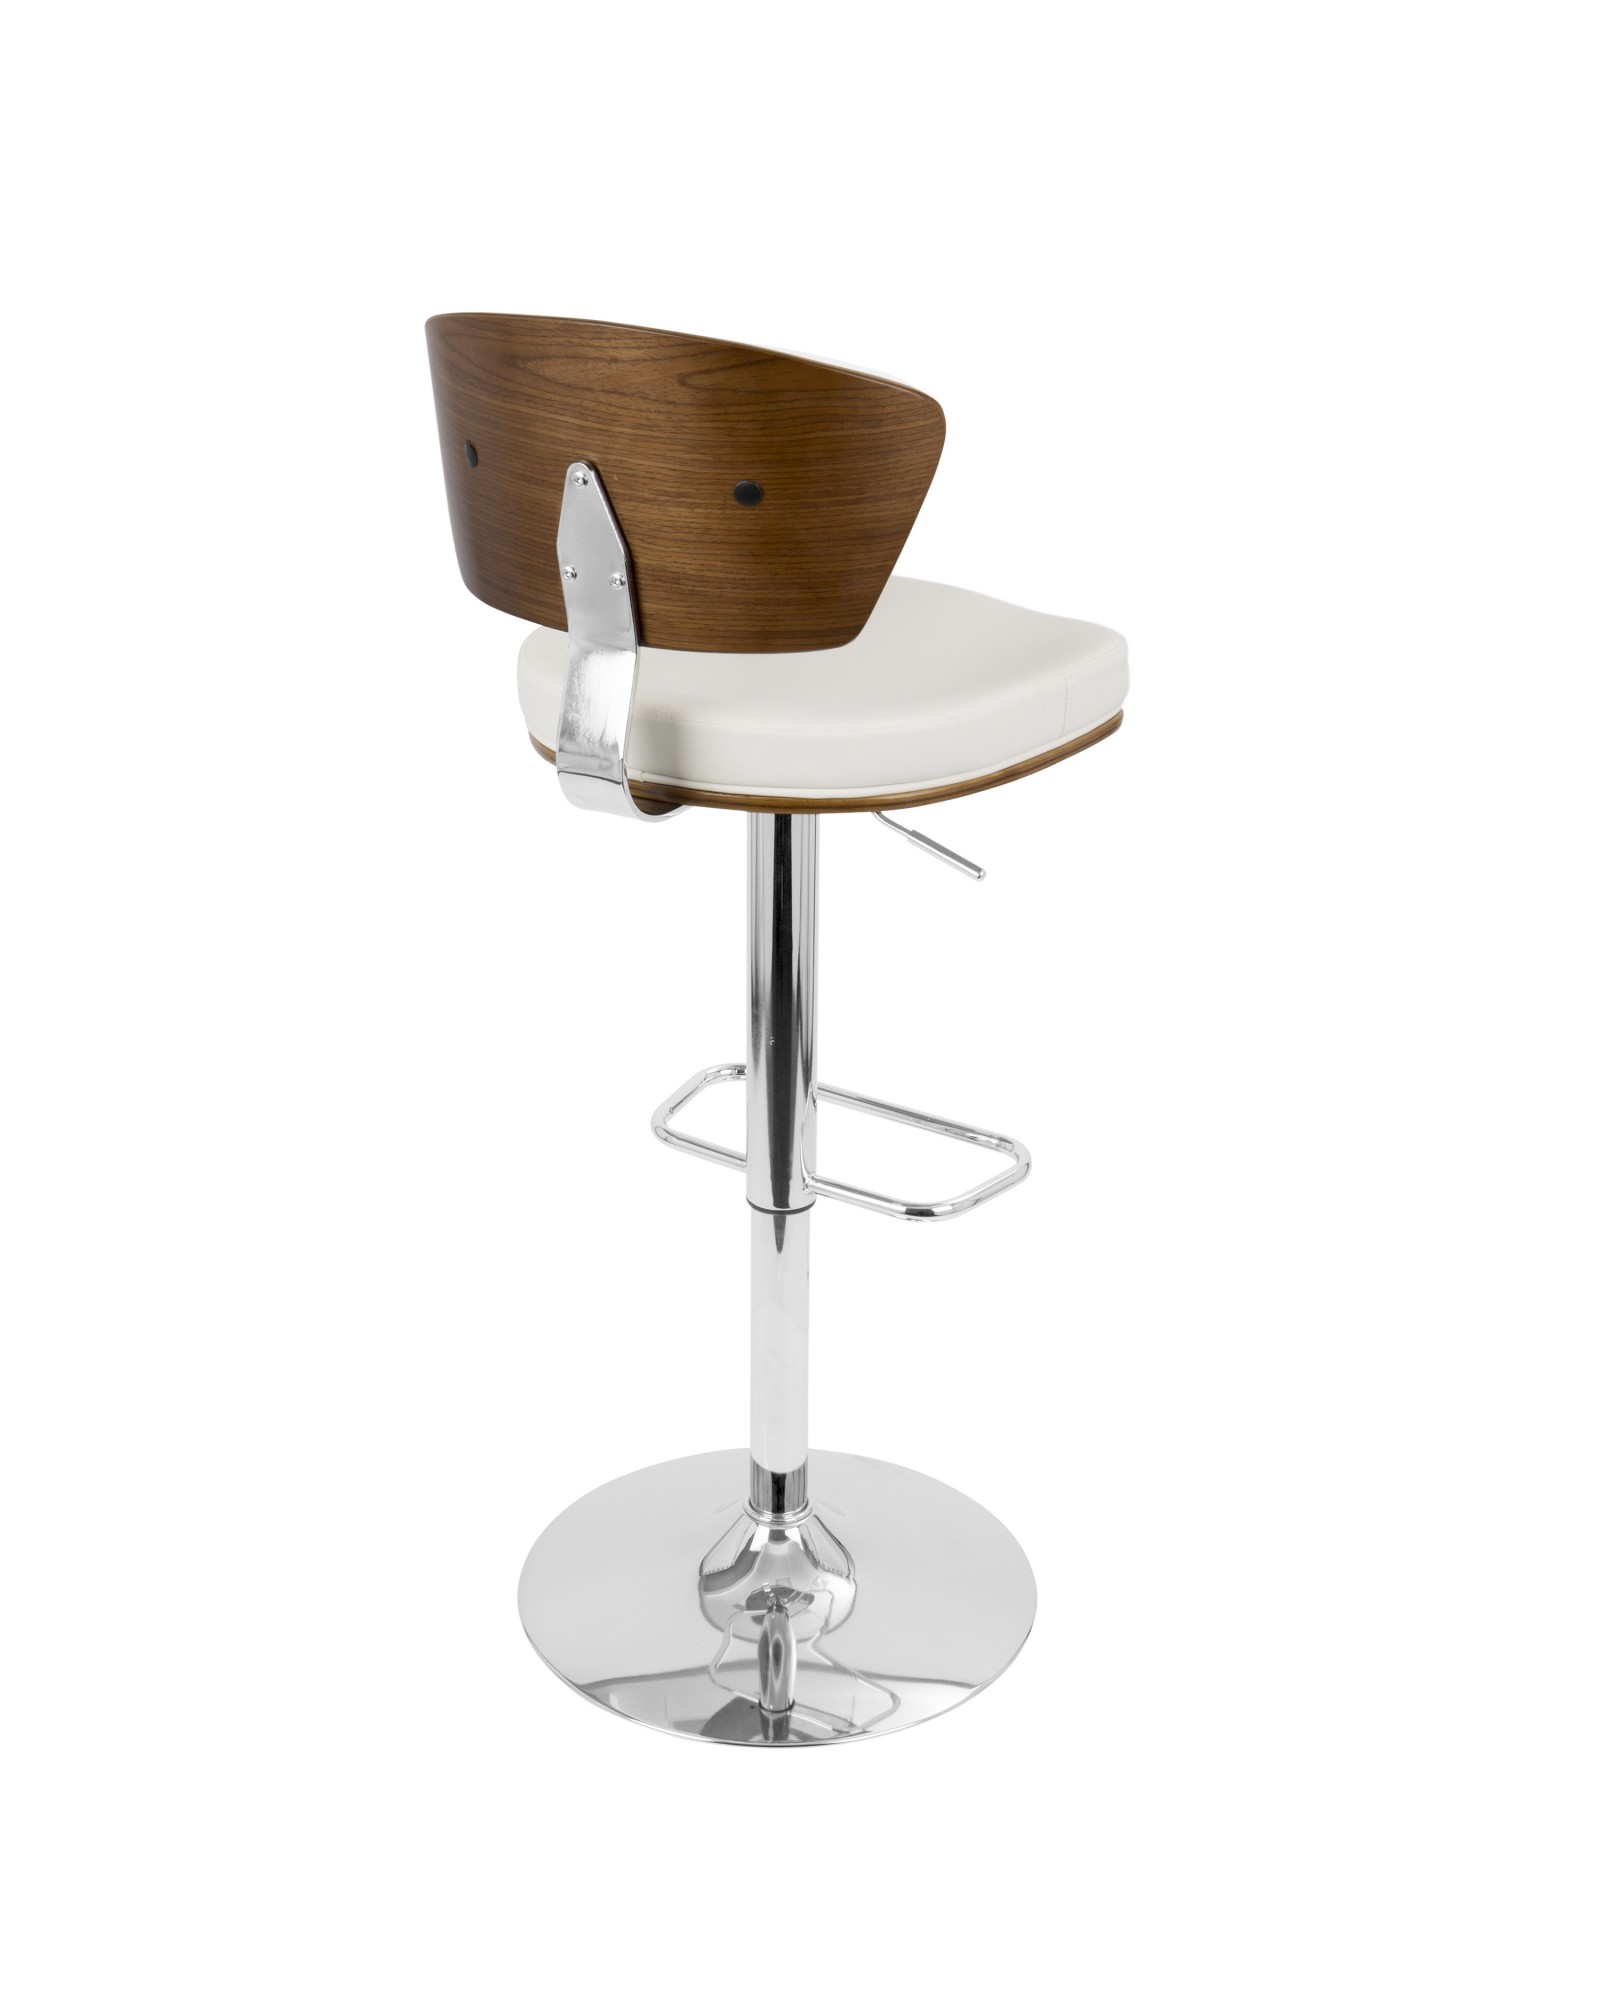 Ravinia Mid-Century Modern Adjustable Barstool with Swivel in Walnut and White Faux Leather